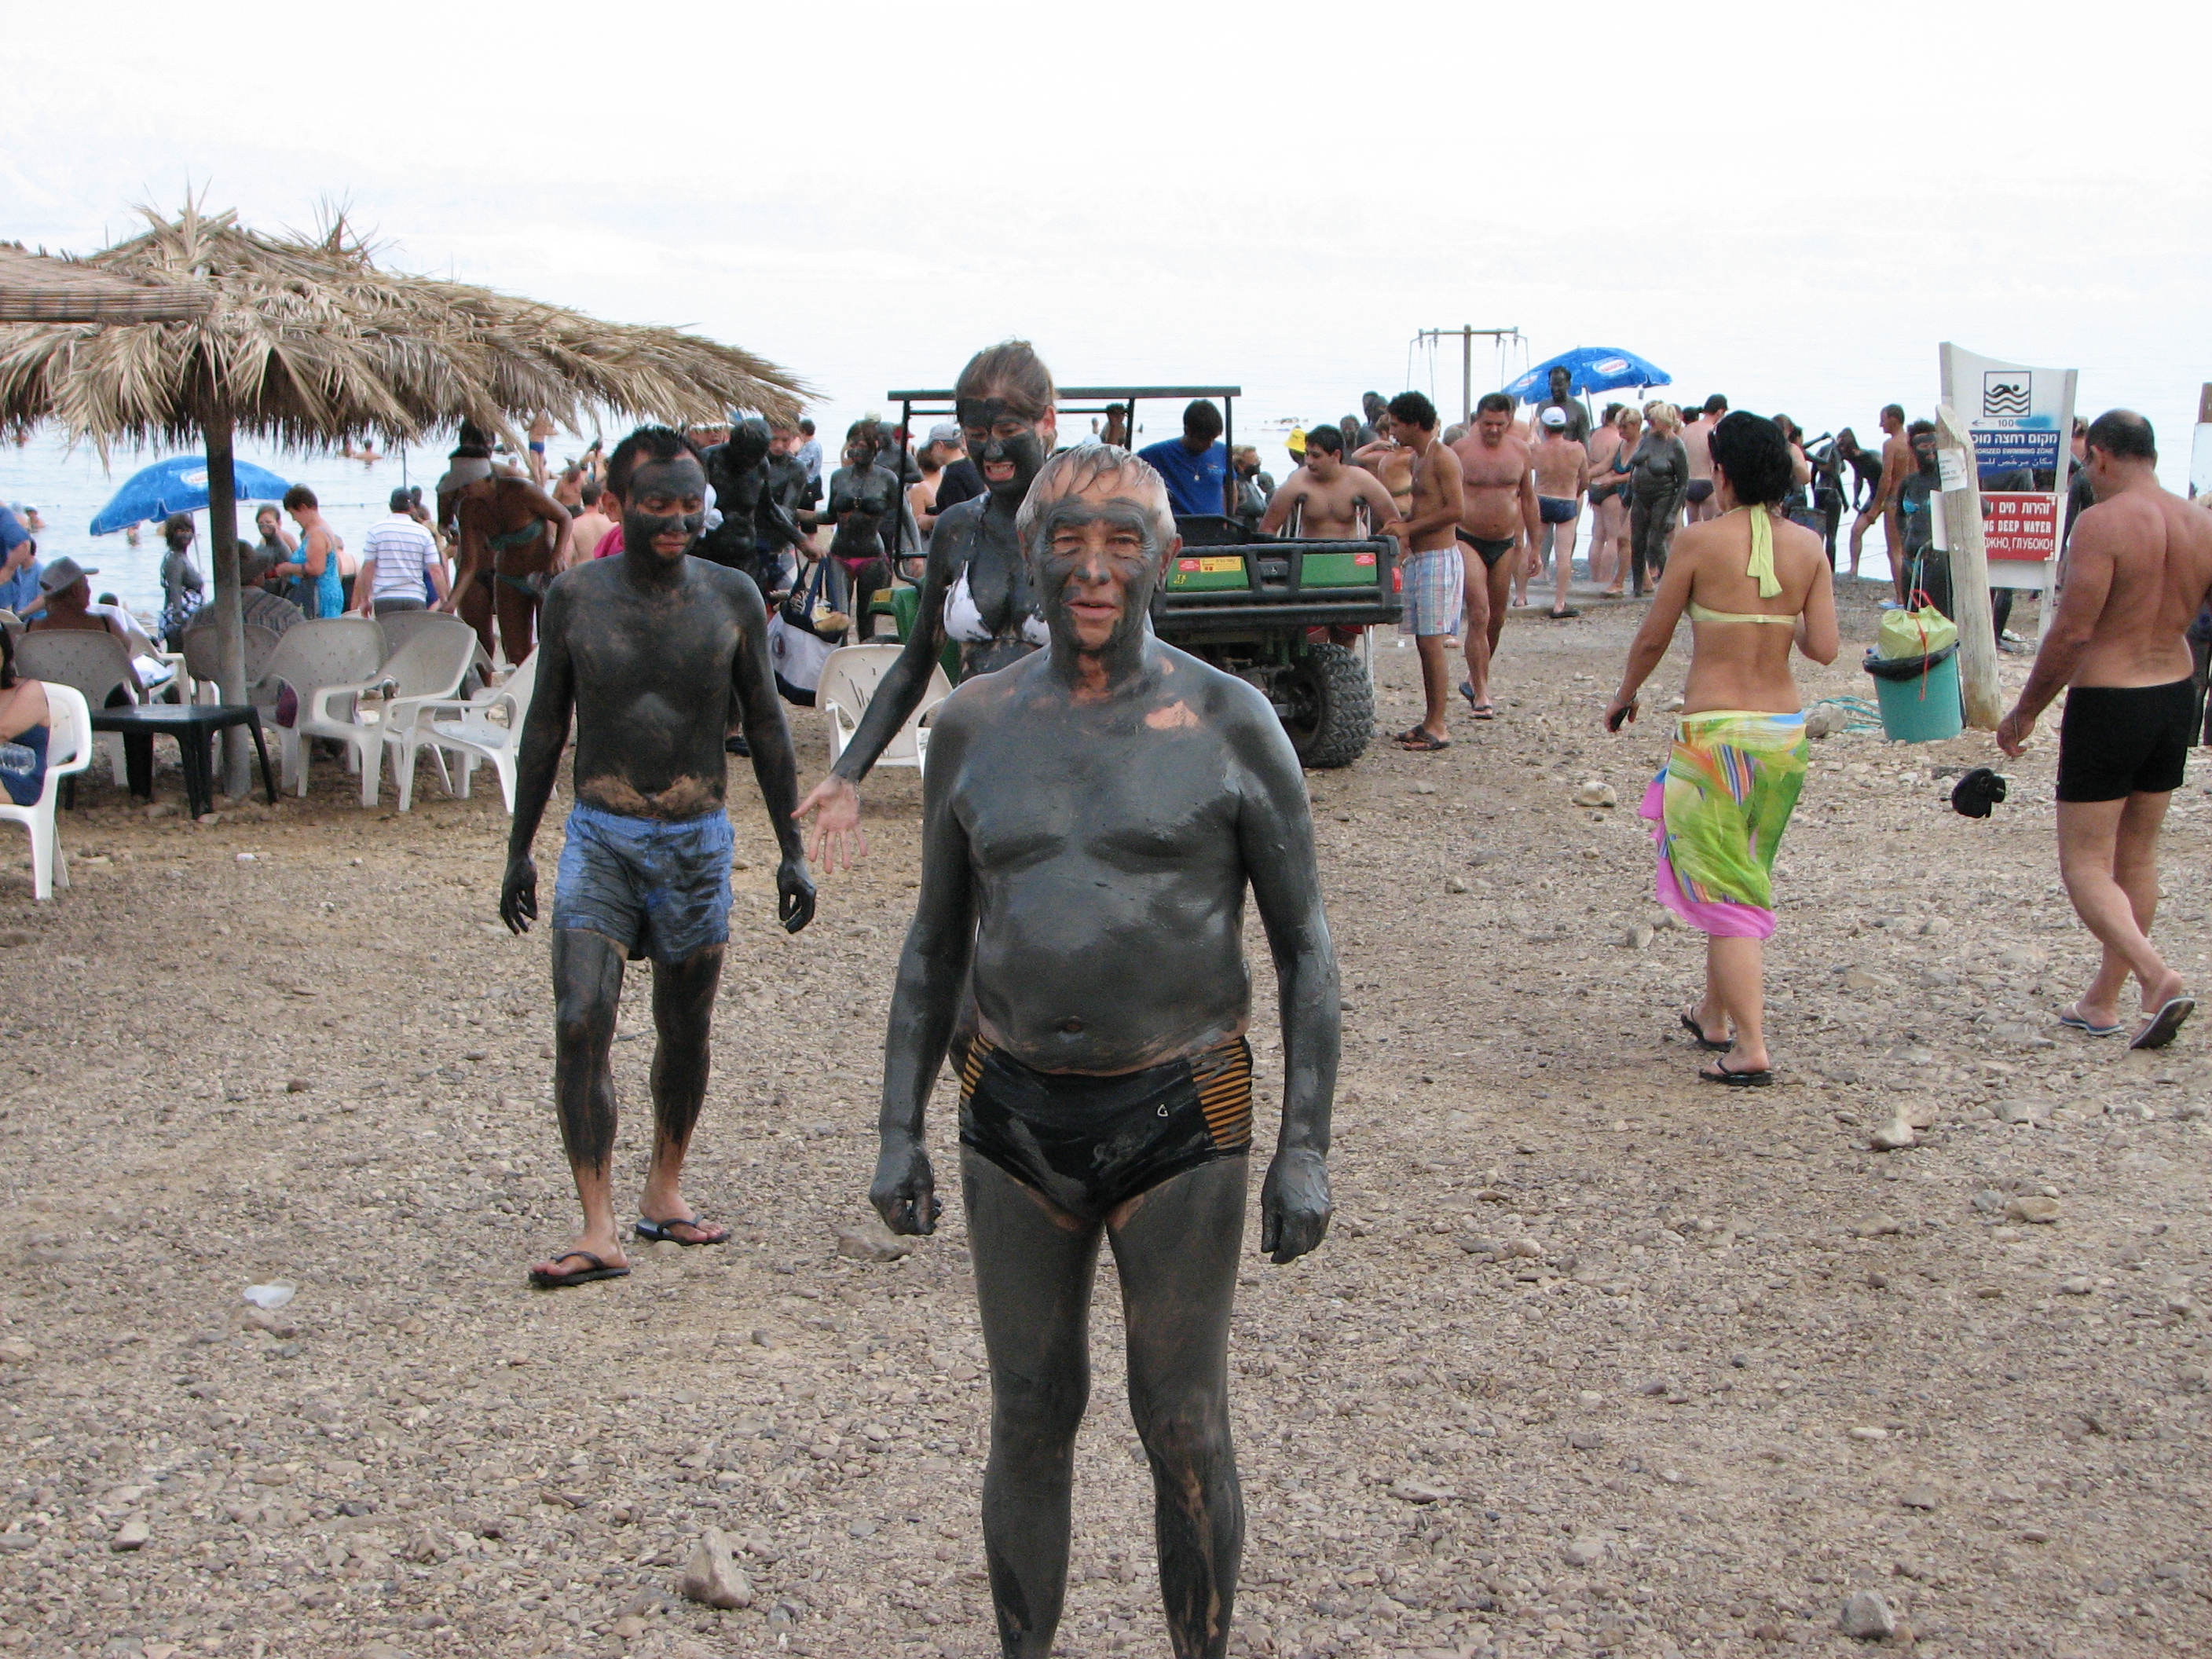 People smeared with dirt on the Dead Sea shore, Israel, 2011